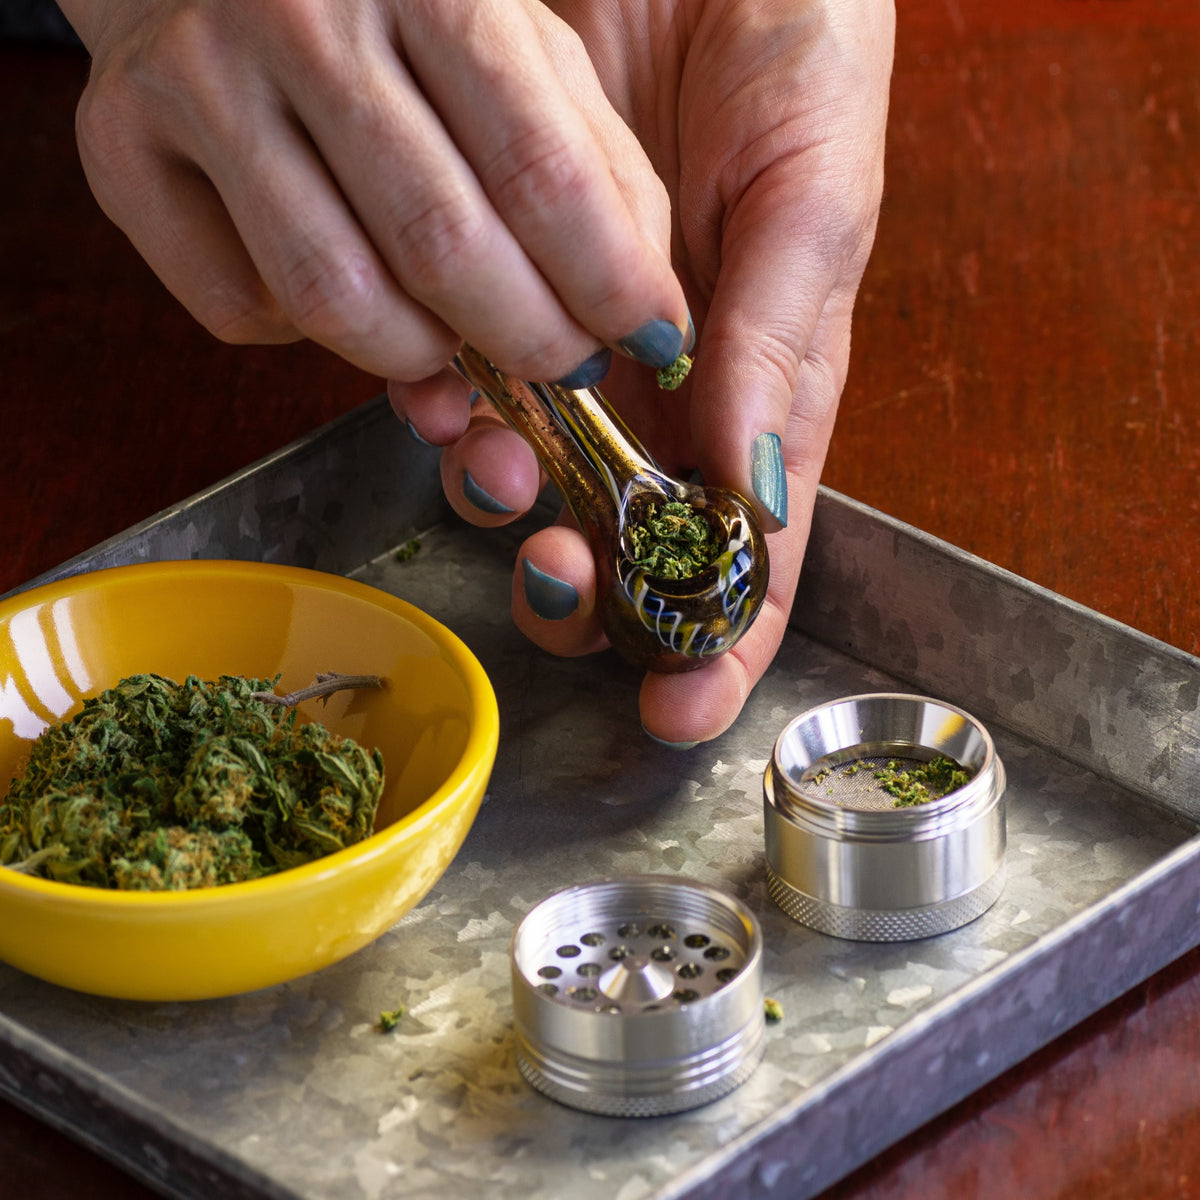 What Is a Bowl of Weed, And How Do You Pack It?